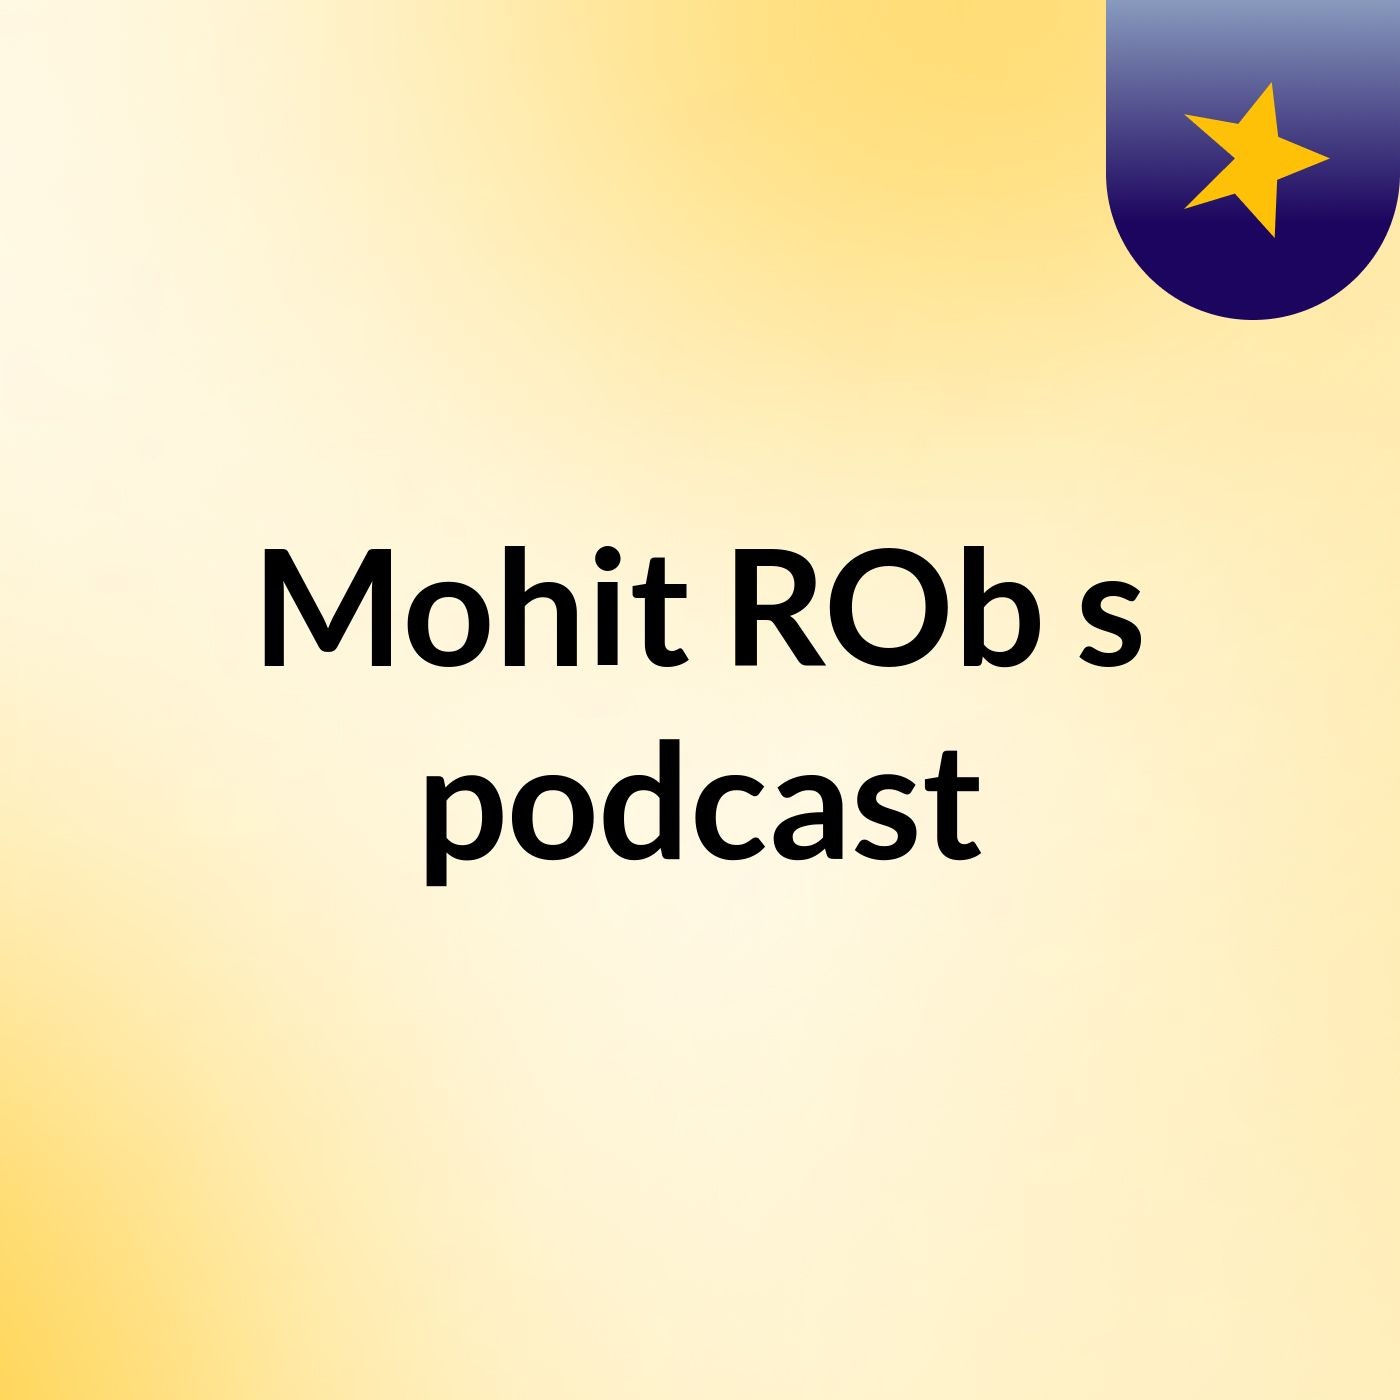 Mohit ROb's podcast